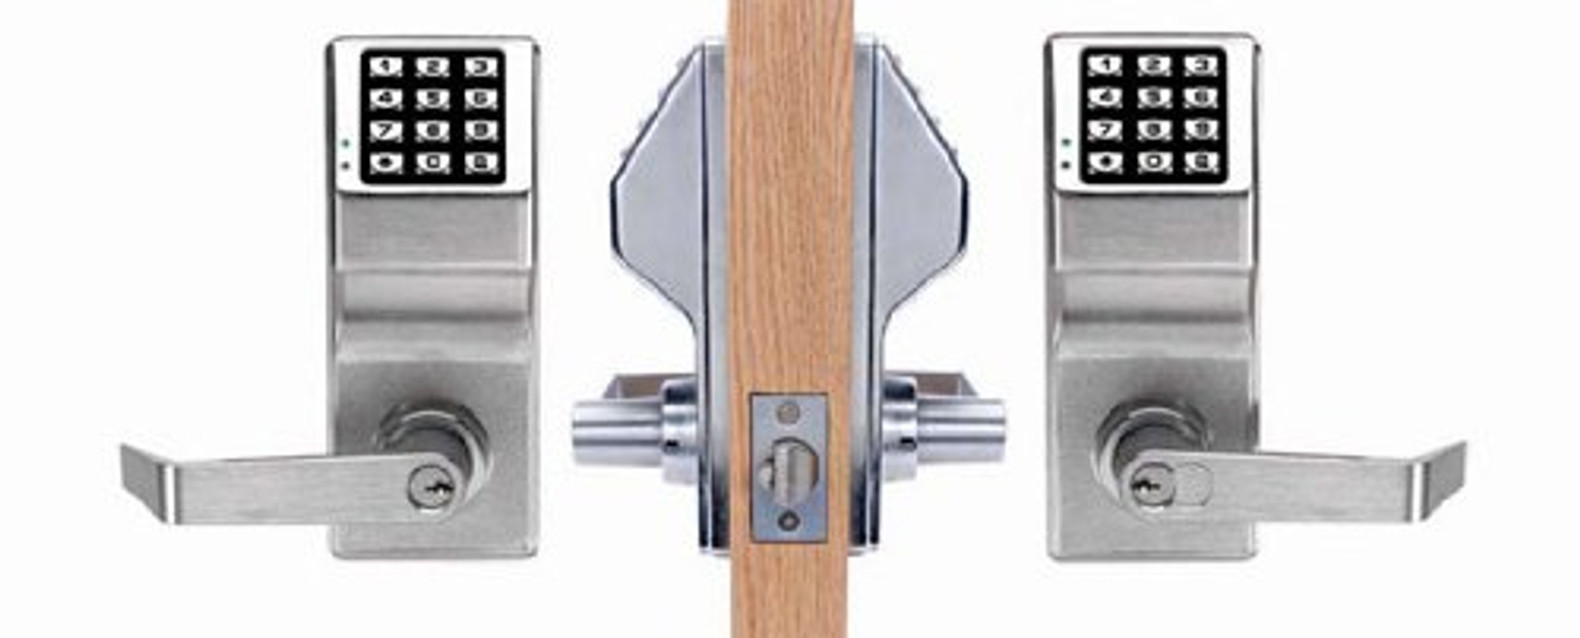 Alarm Lock Double Sides DL5300 Pin code access only